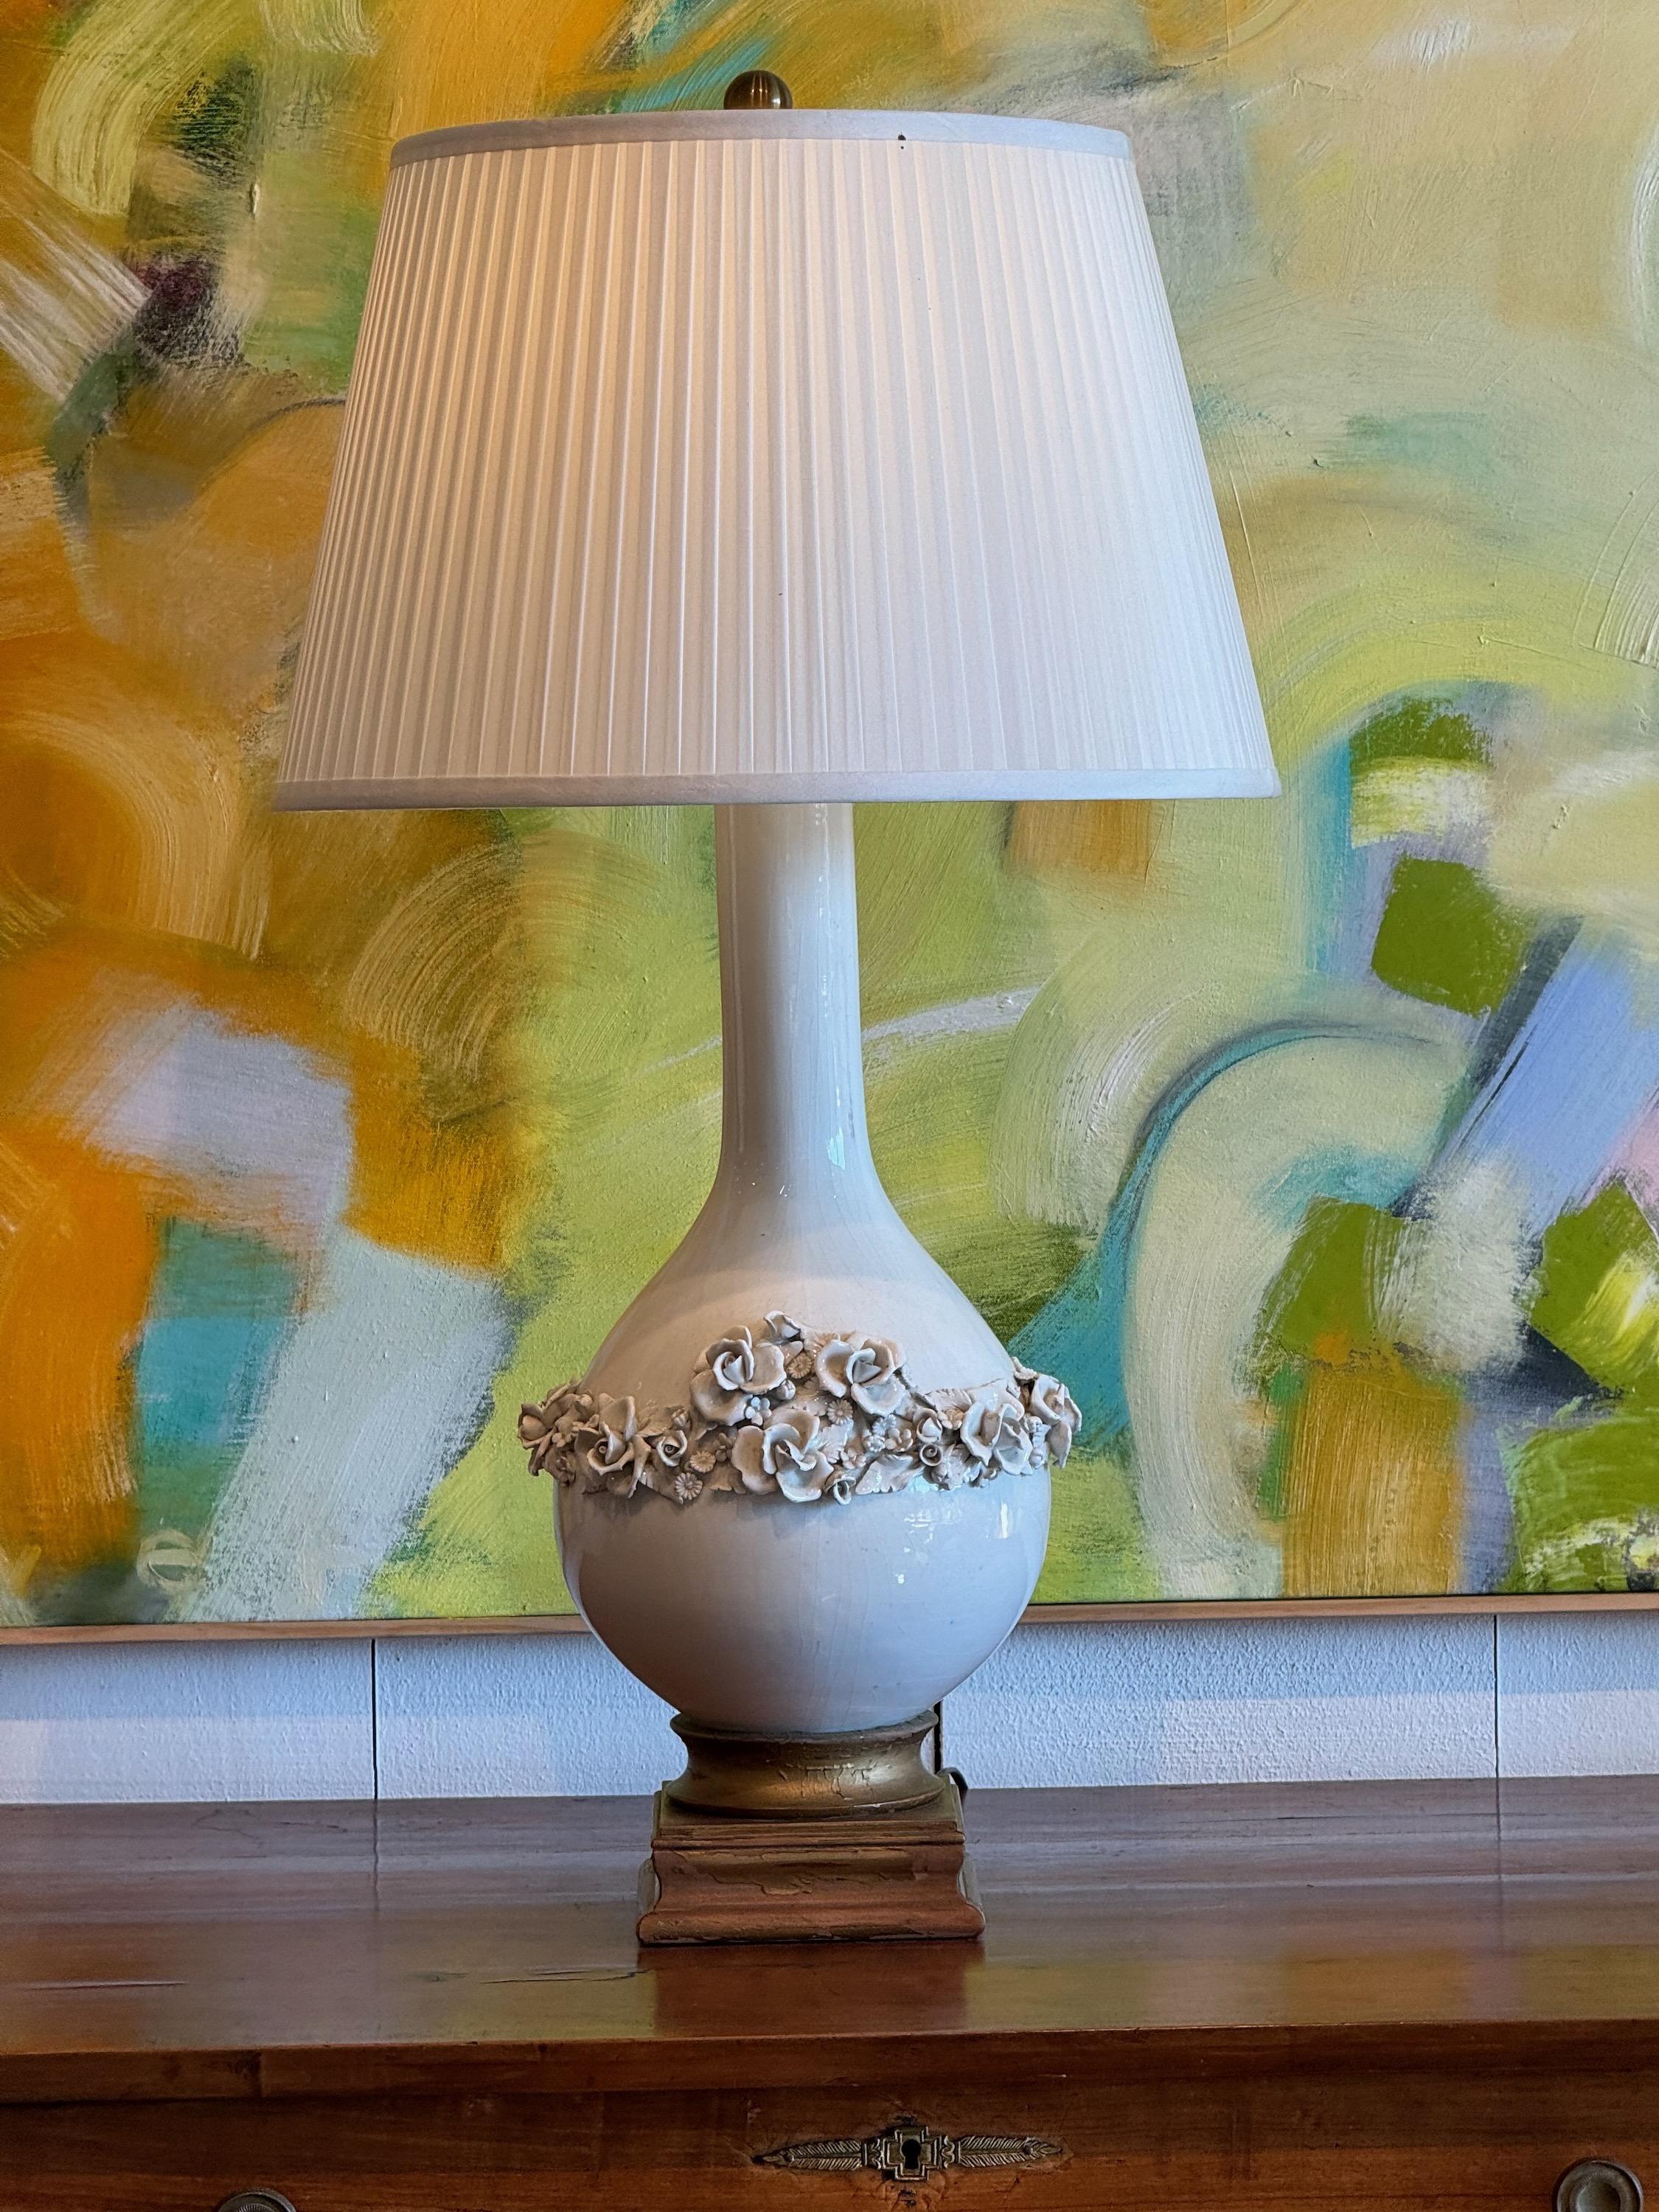 Beautiful blanc de chine lamp with floral appliqués. Made in the 1950s.